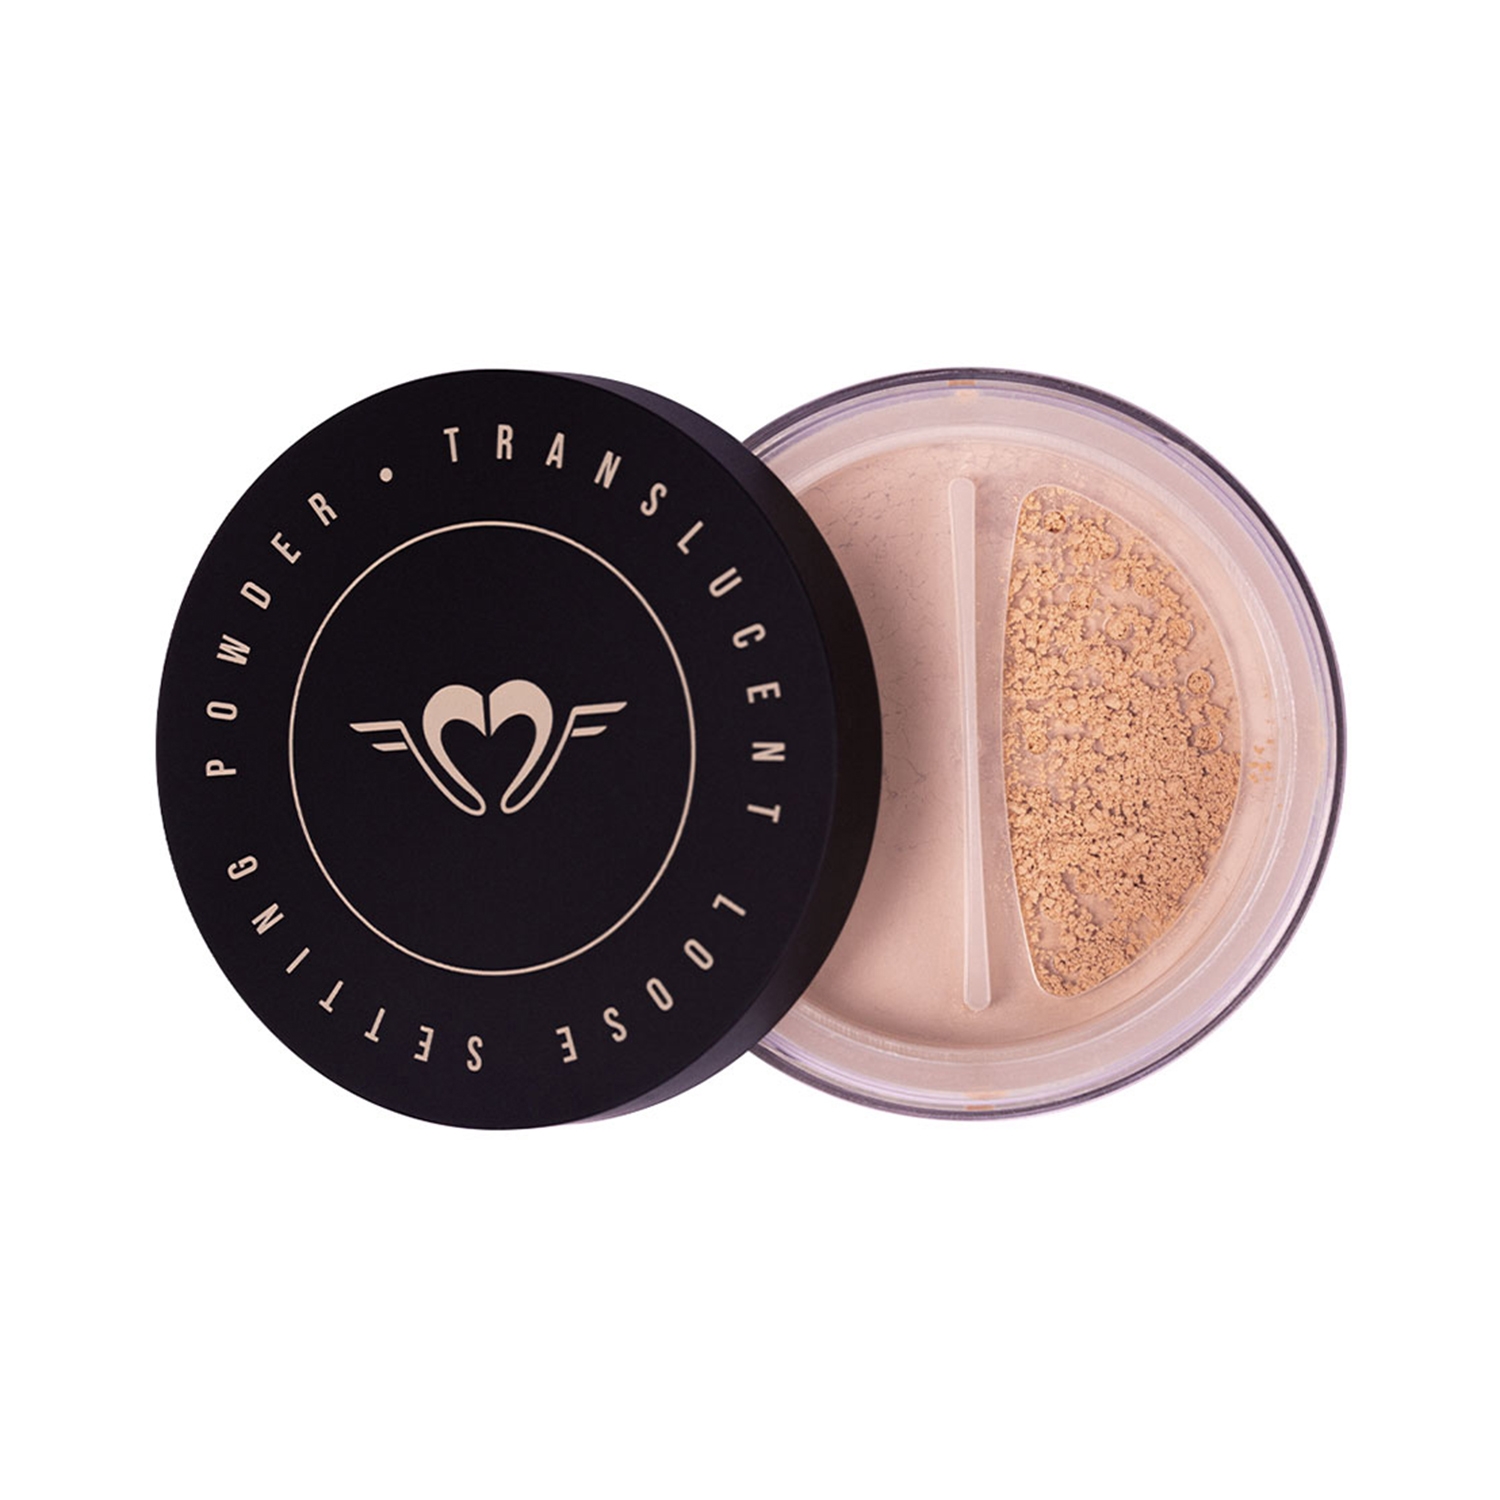 Daily Life Forever52 | Daily Life Forever52 Translucent Loose Setting Powder TLM005 - Peach (7g)